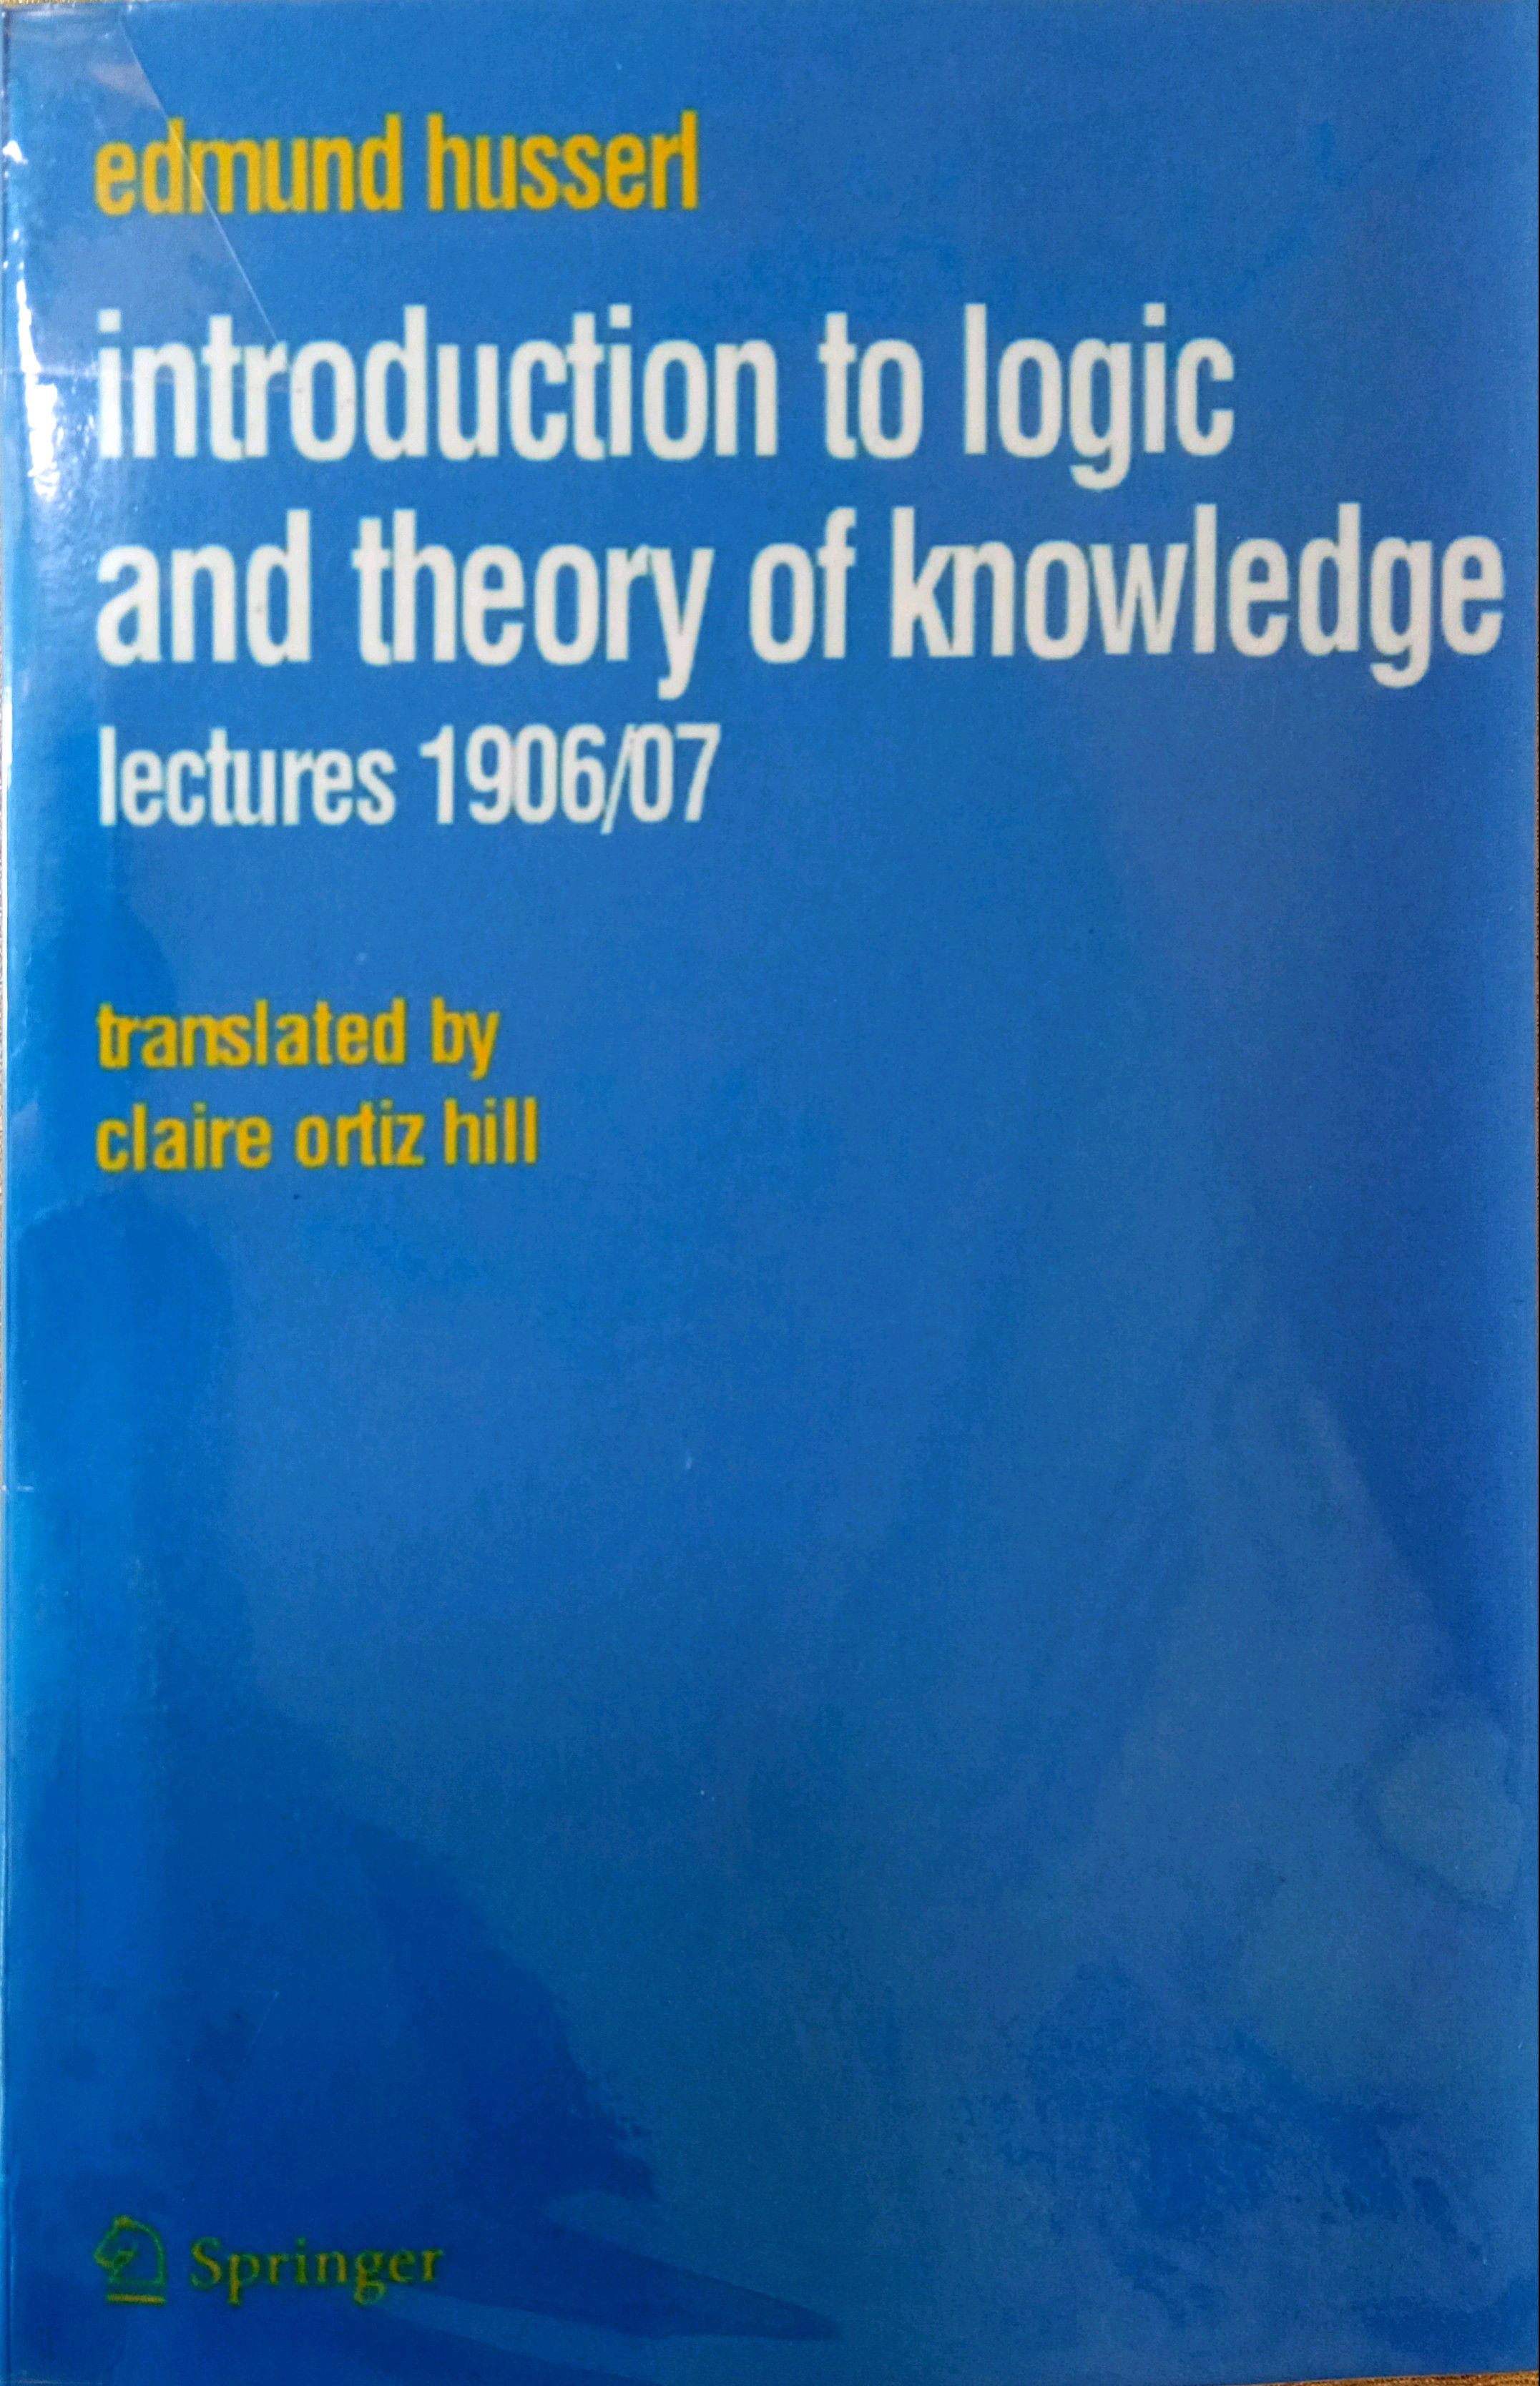 INTRODUCTION TO LOGIC AND THEORY OF KNOWLEDGE